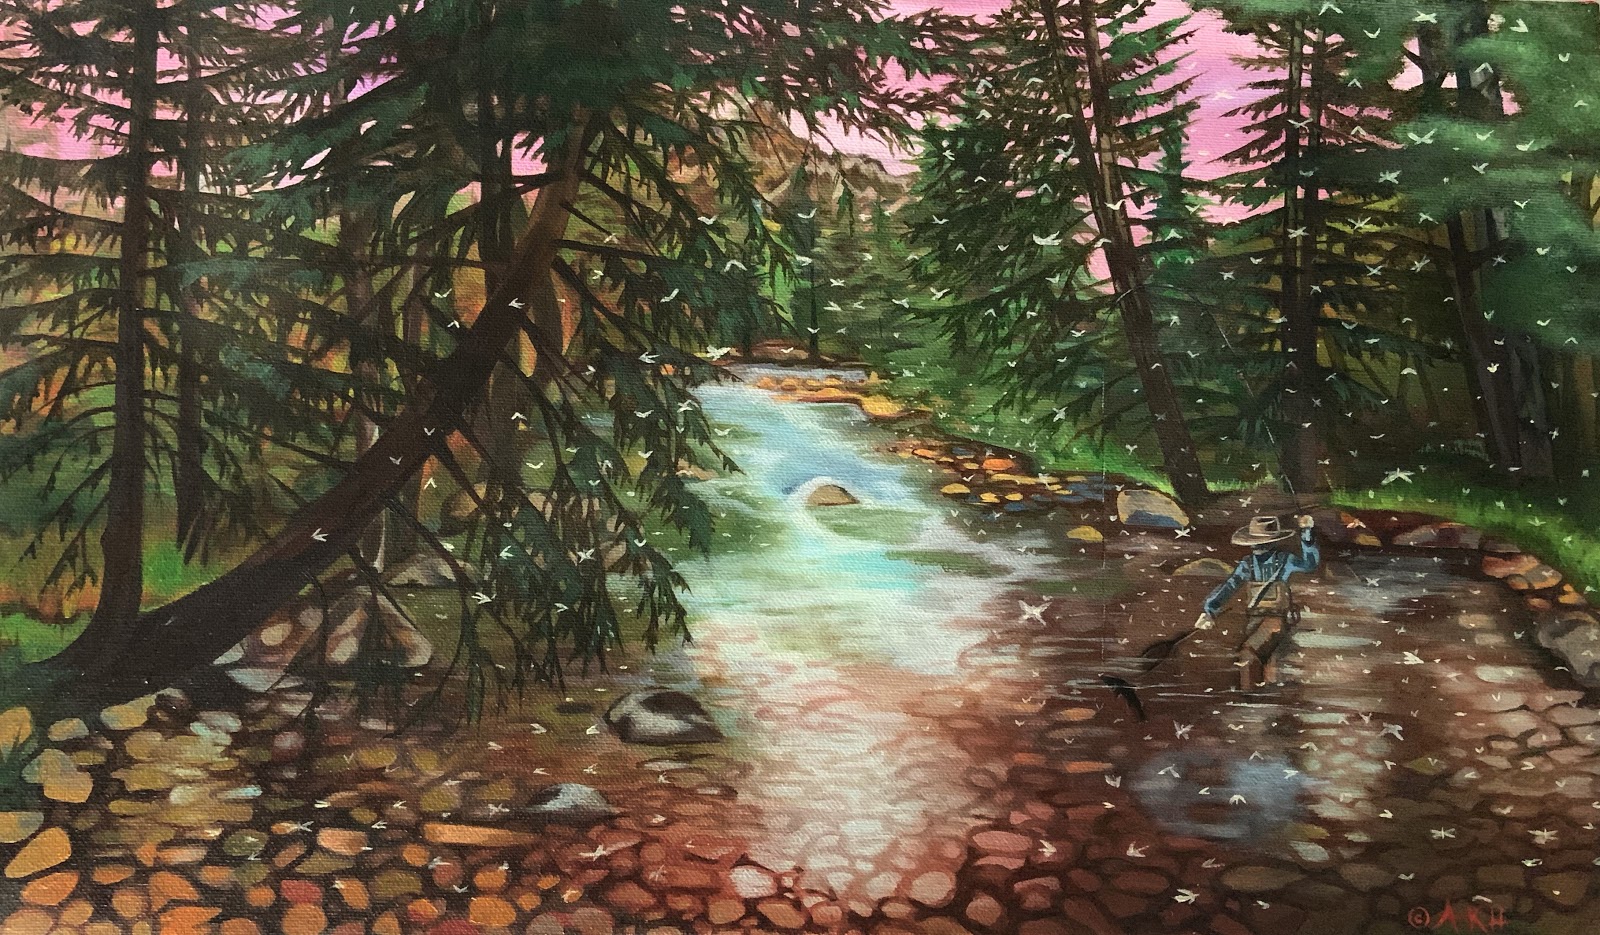 Painting of angler wading in Gore Creek, with adult flies flying around.